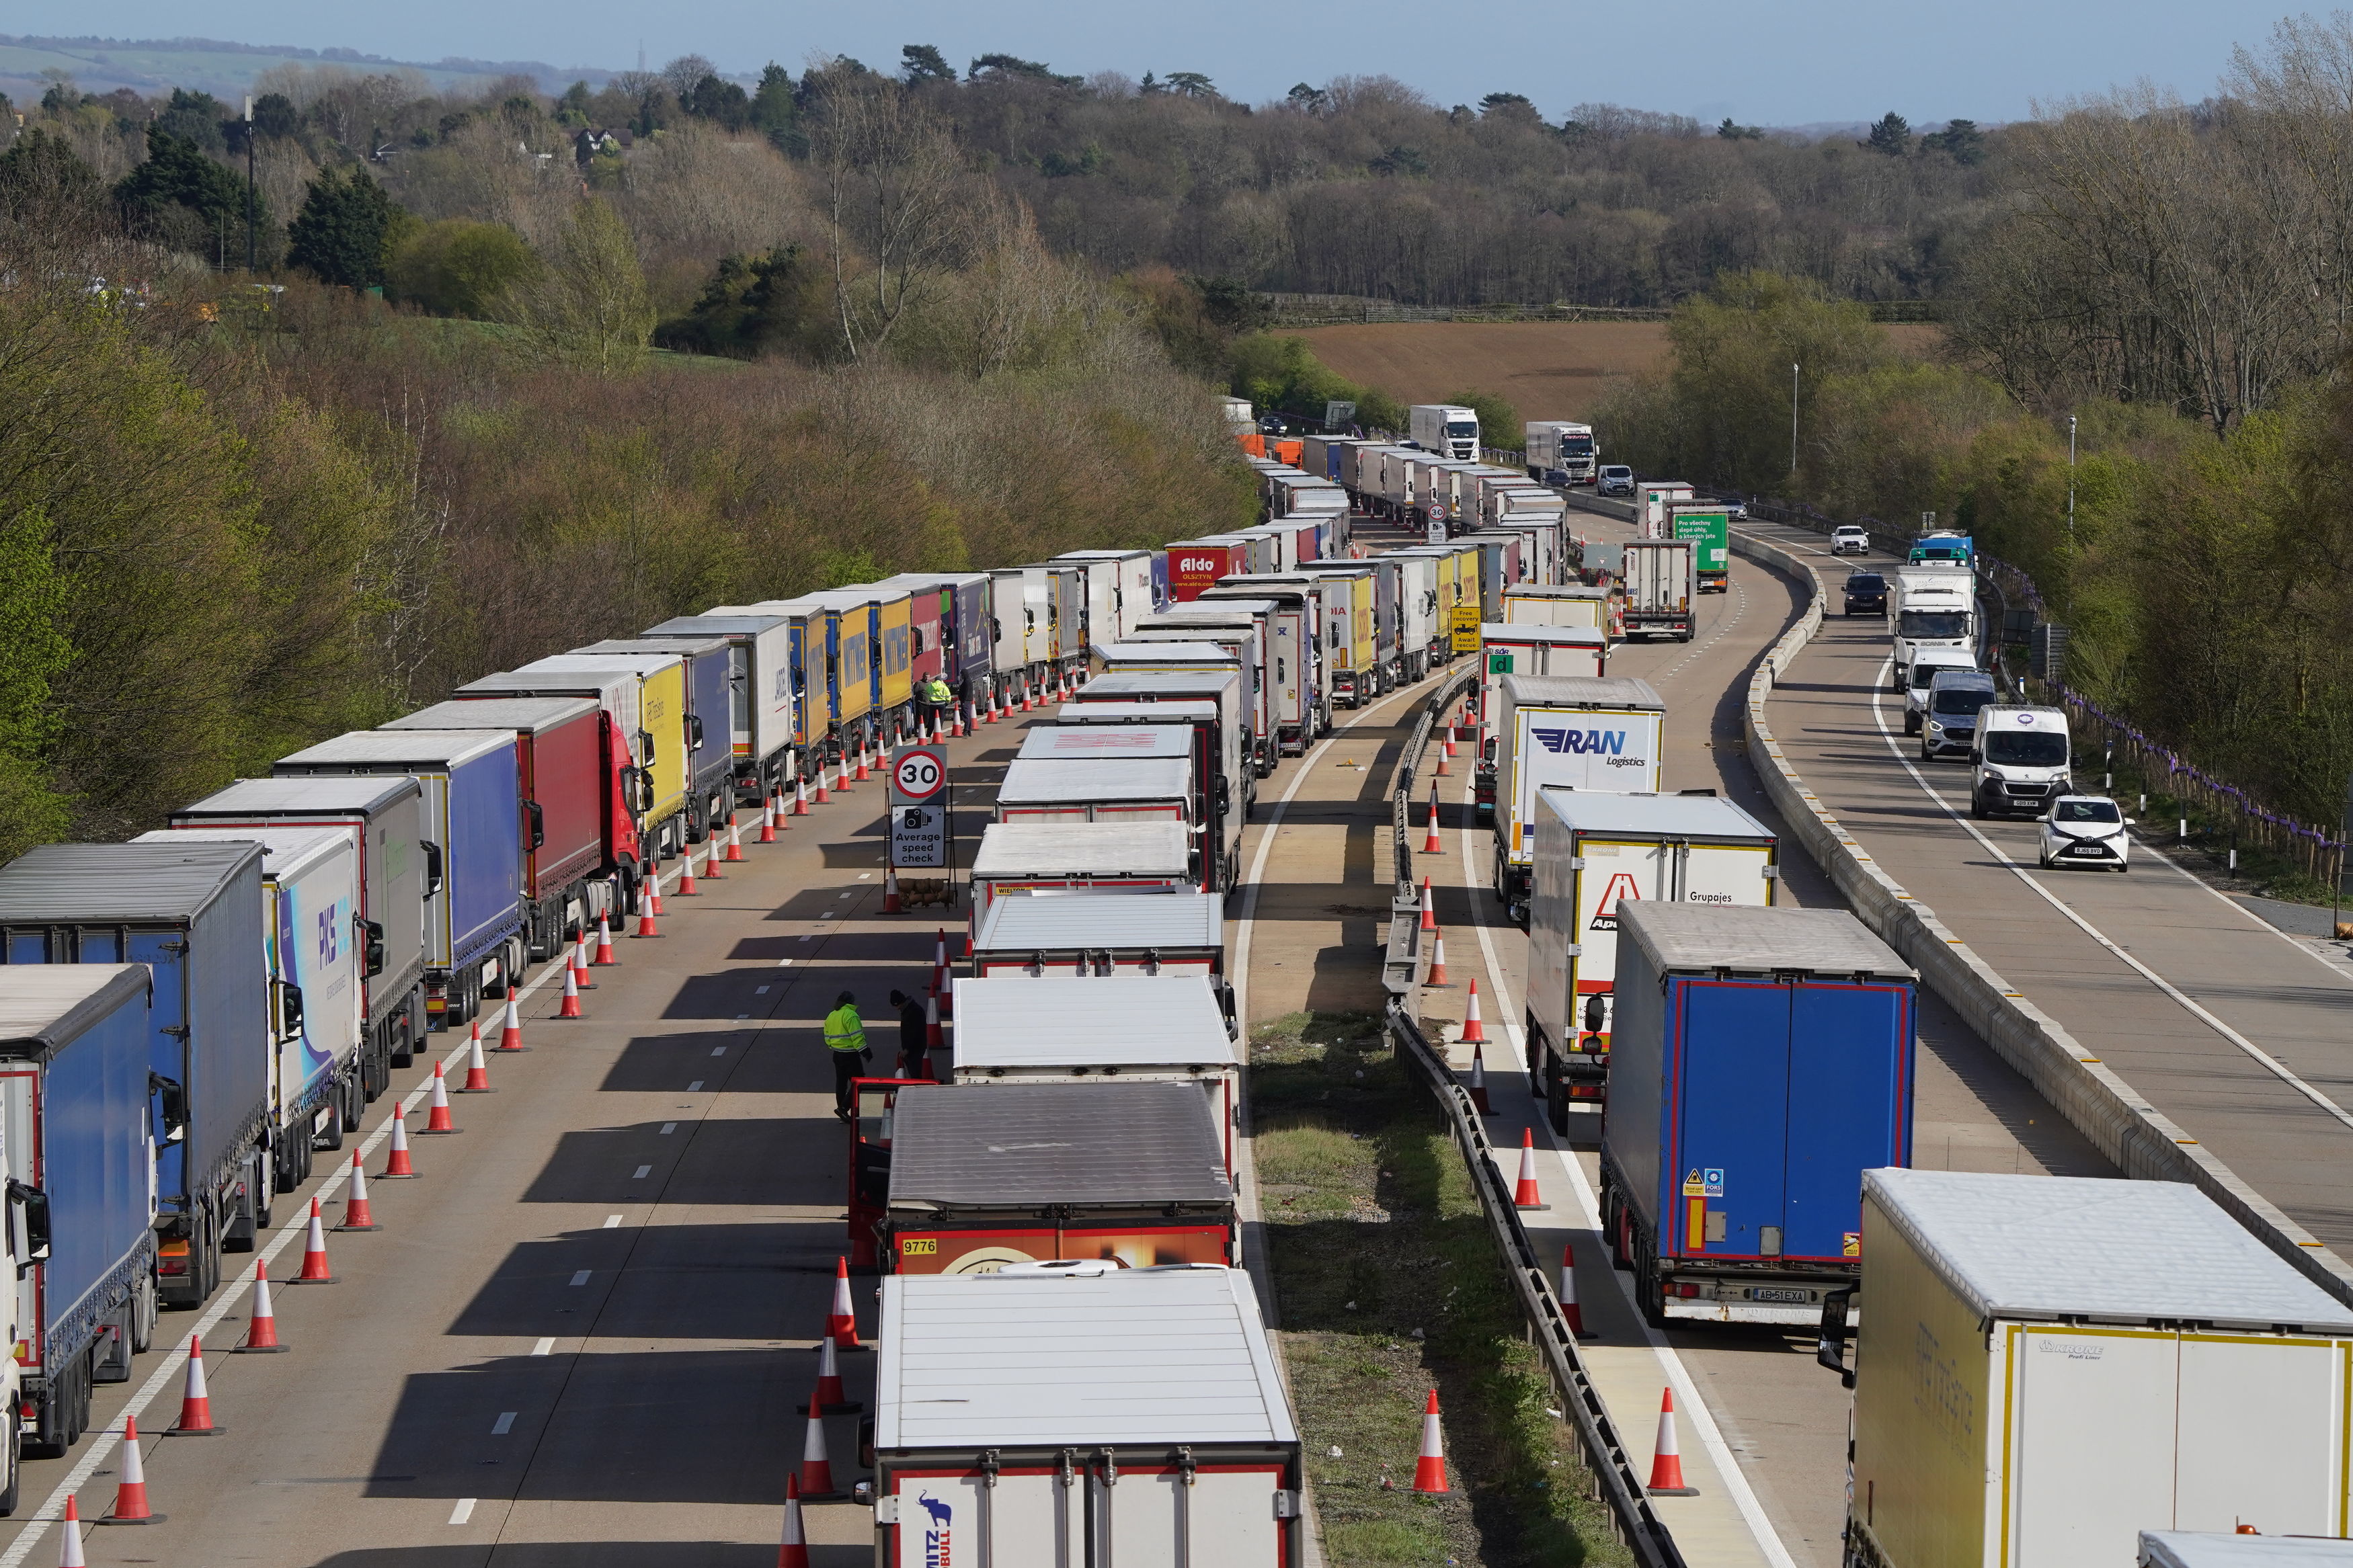 UK hauliers have said perishable goods are losing quality as congestion around Dover has led to delays of up to 25 hours